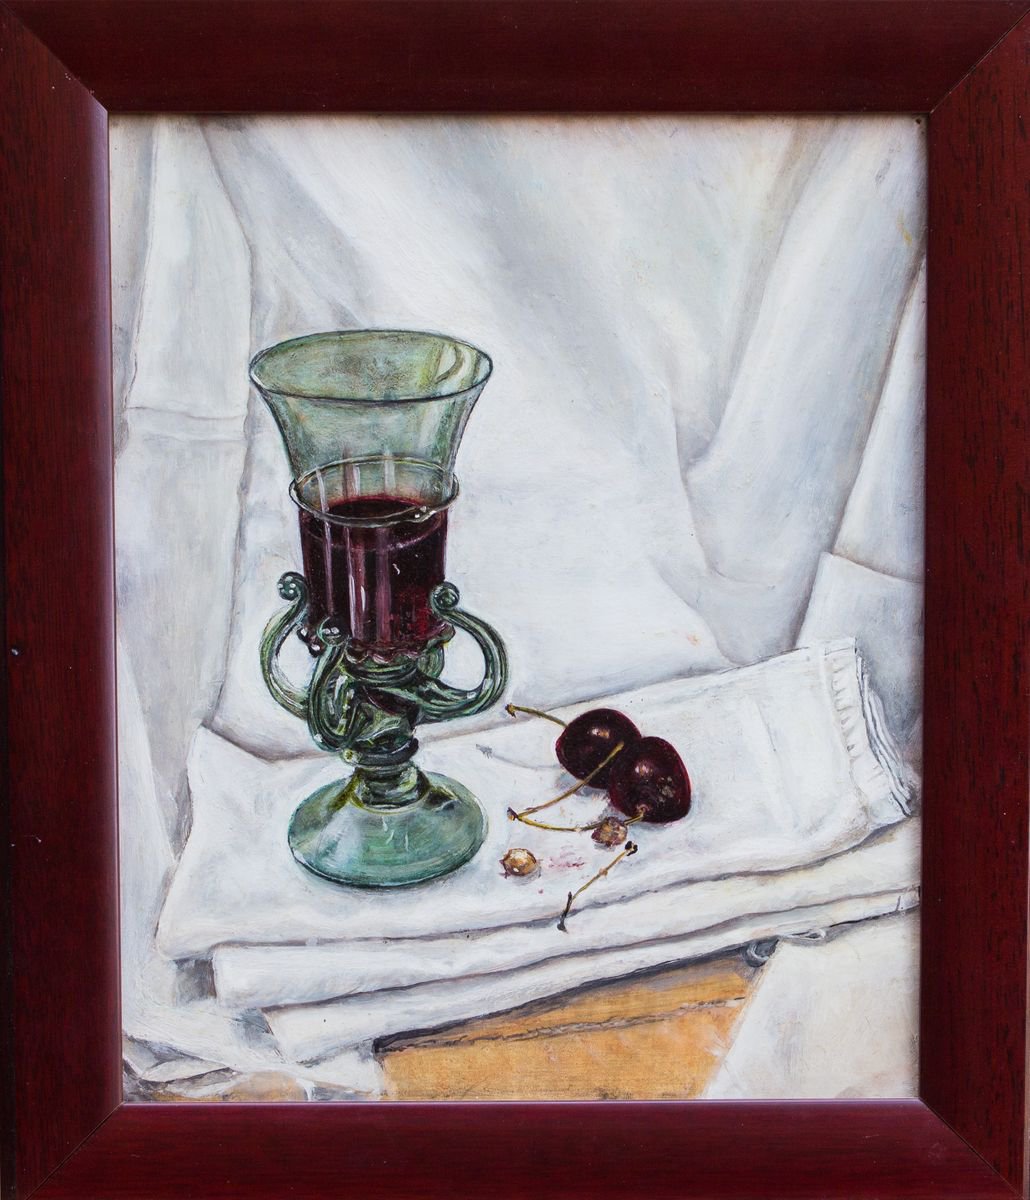 Czech Wine Glass by Gilly Reeves Hardcastle